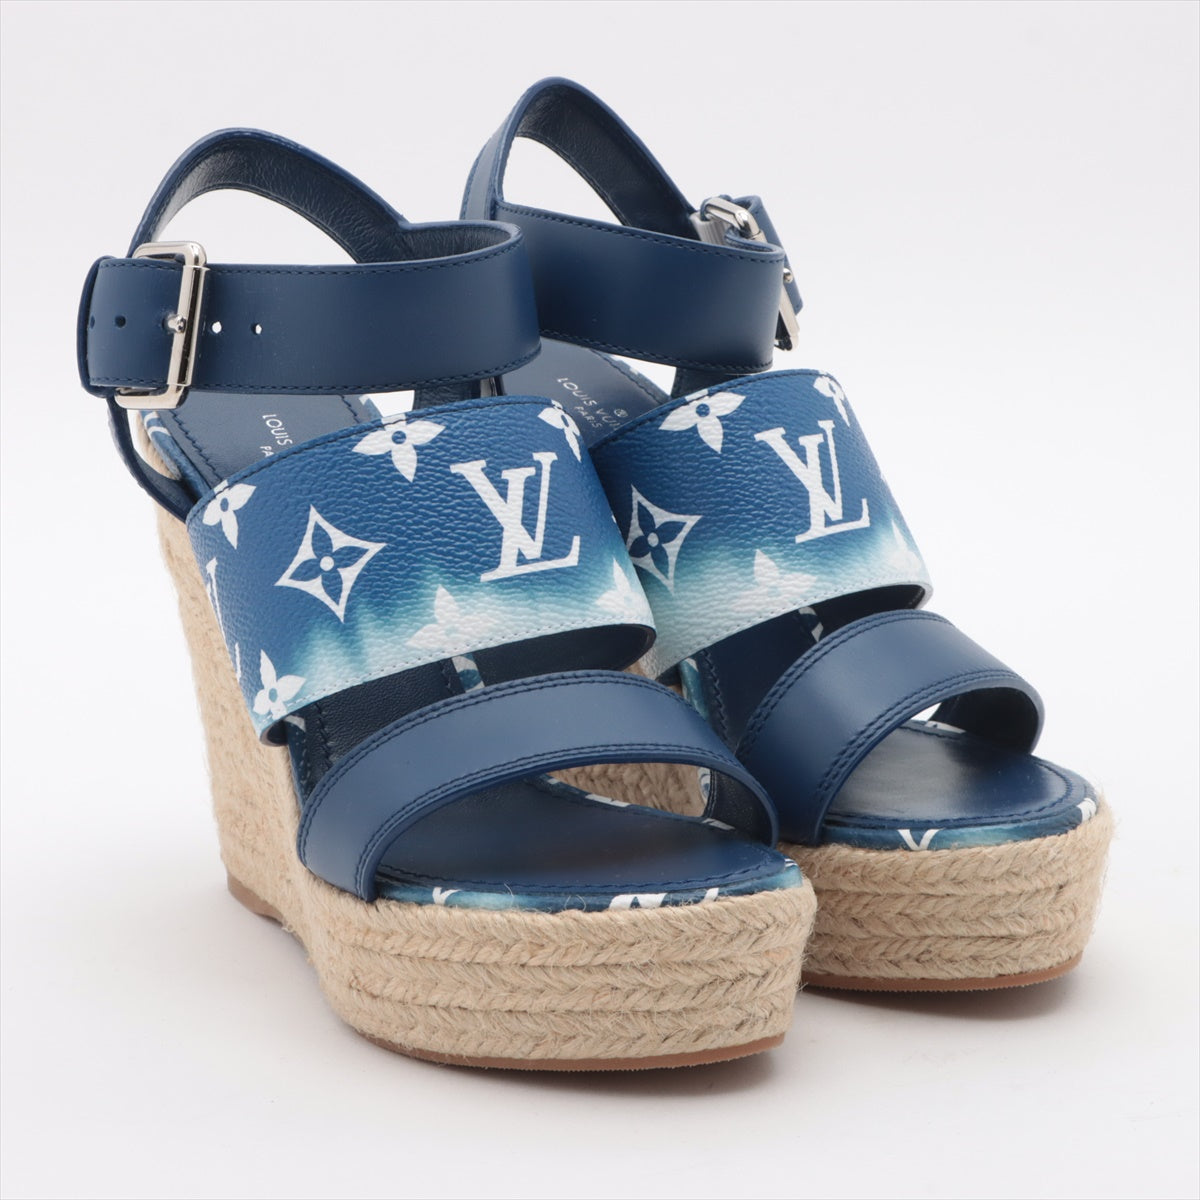 Louis Vuitton Starboard line 20 years PVC & leather Wedge Sole Sandals 35 1/2 Ladies' Blue CL0210 There is a bag LV escale Monogram